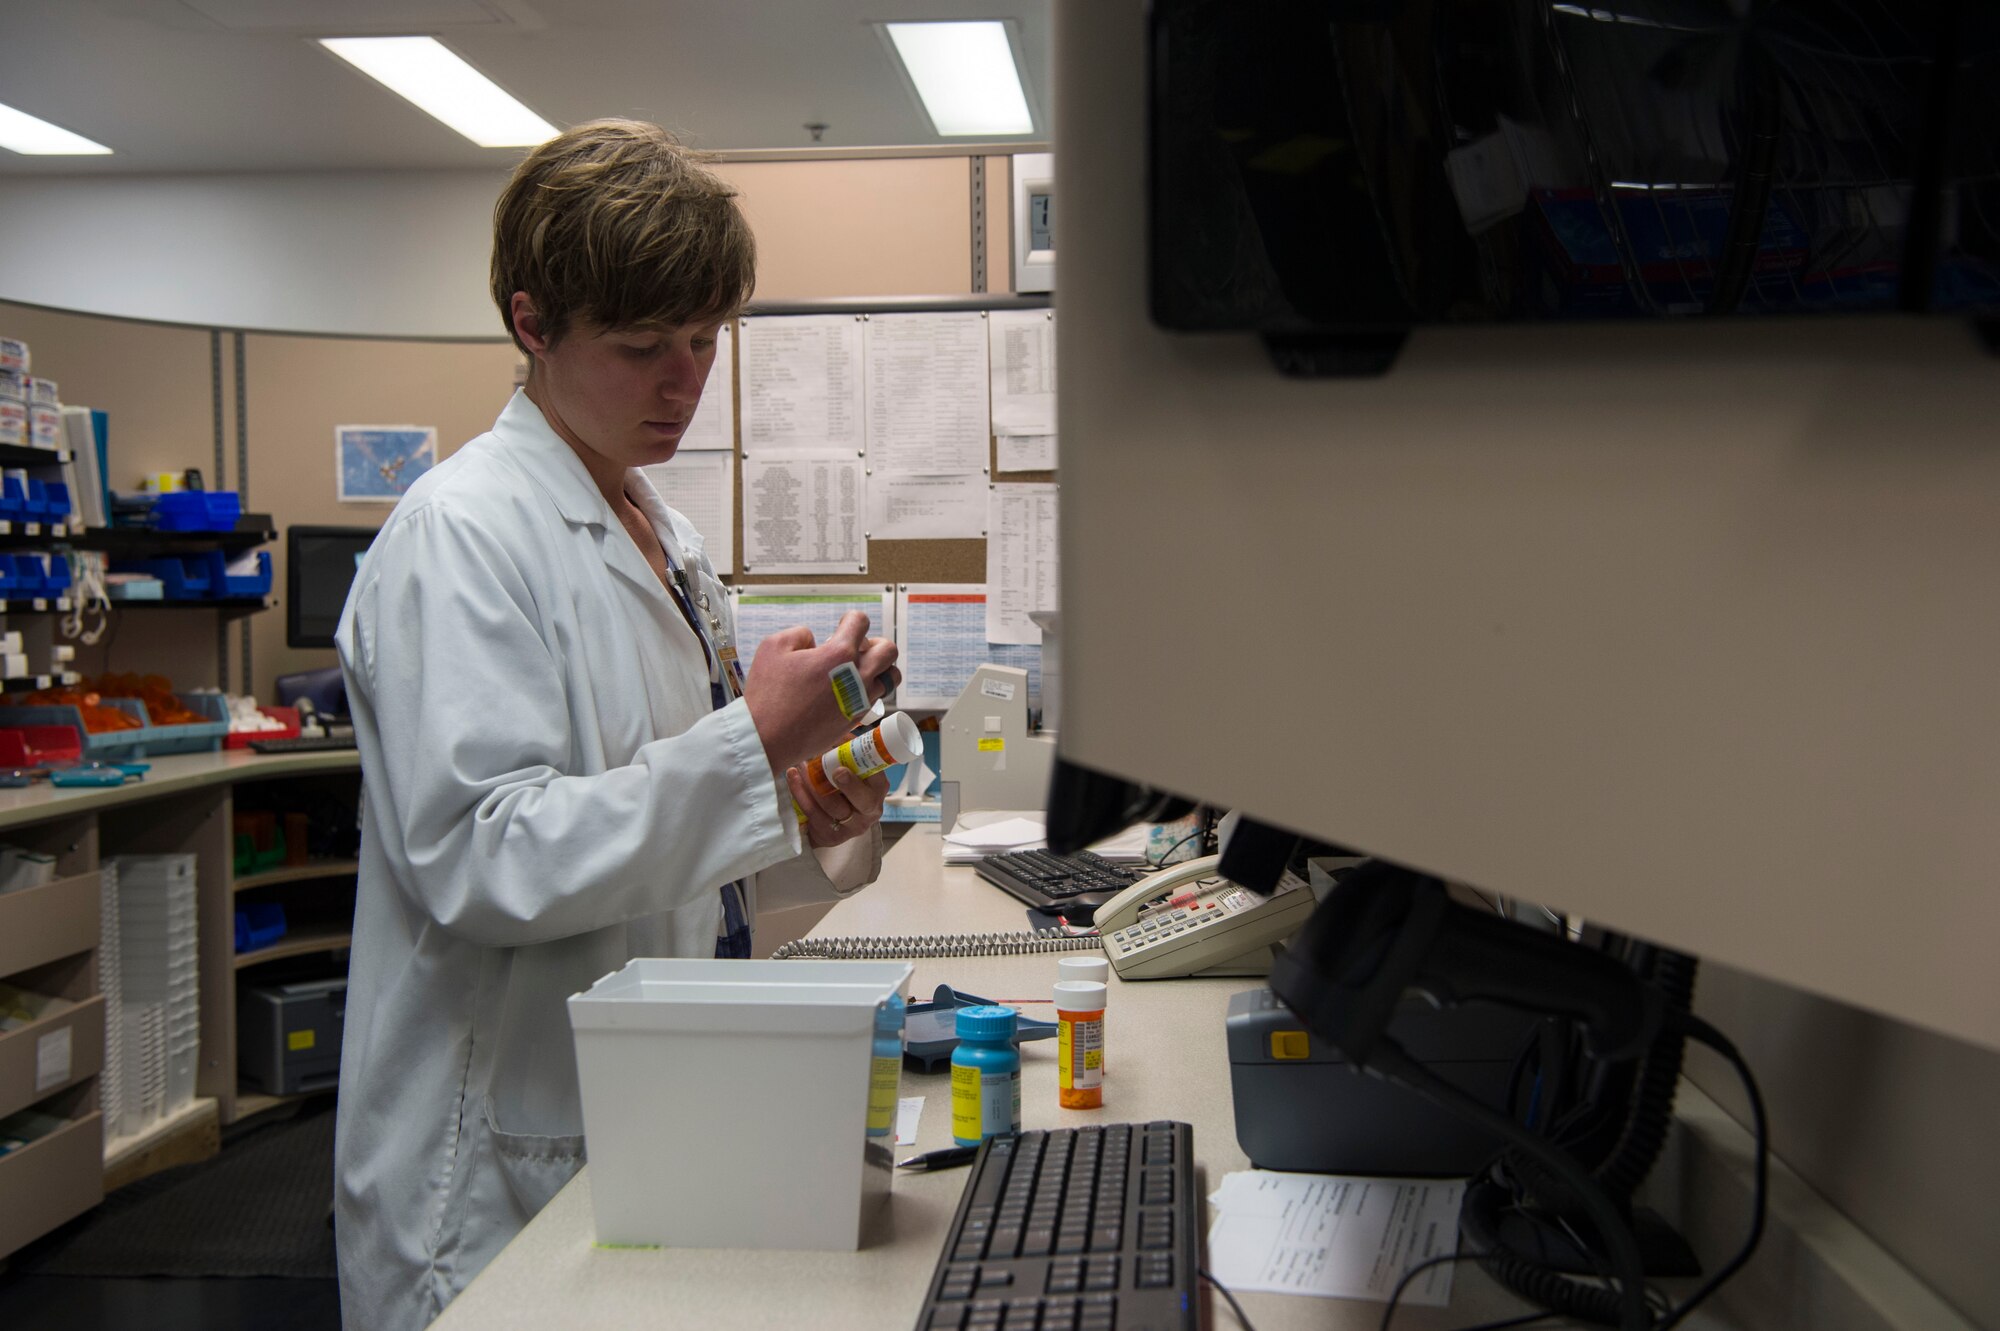 Natasha Kalda, 90th Medical Support Squadron pharmacist, fulfills prescriptions at F.E. Warren Air Force Base, Wyo., Jan. 20, 2017. The Air Force celebrates Biomedical Science Corps Appreciation Week Jan. 23 to 27. The Biomedical Science Corps is comprised of 15 medical AFSCs of which 10 are represented at F.E. Warren. (U.S. Air Force photo by Staff Sgt. Christopher Ruano)
